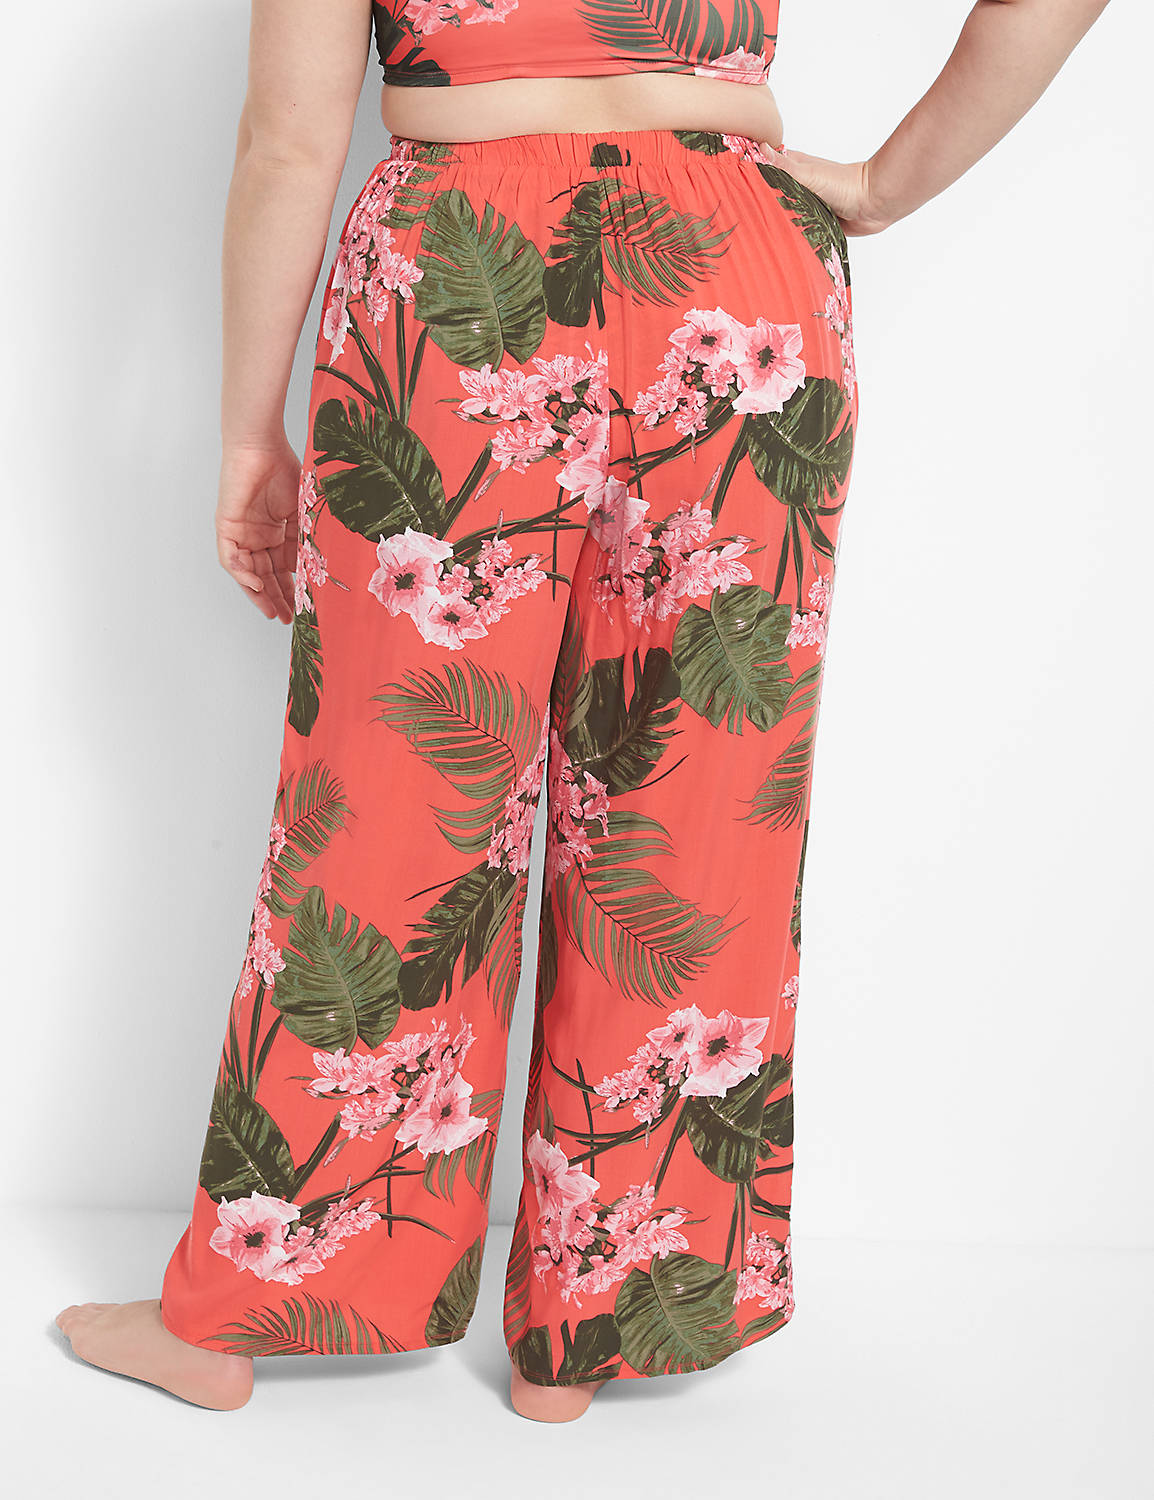 Wide Leg Tie Pant Cover Up 1117730 Product Image 2